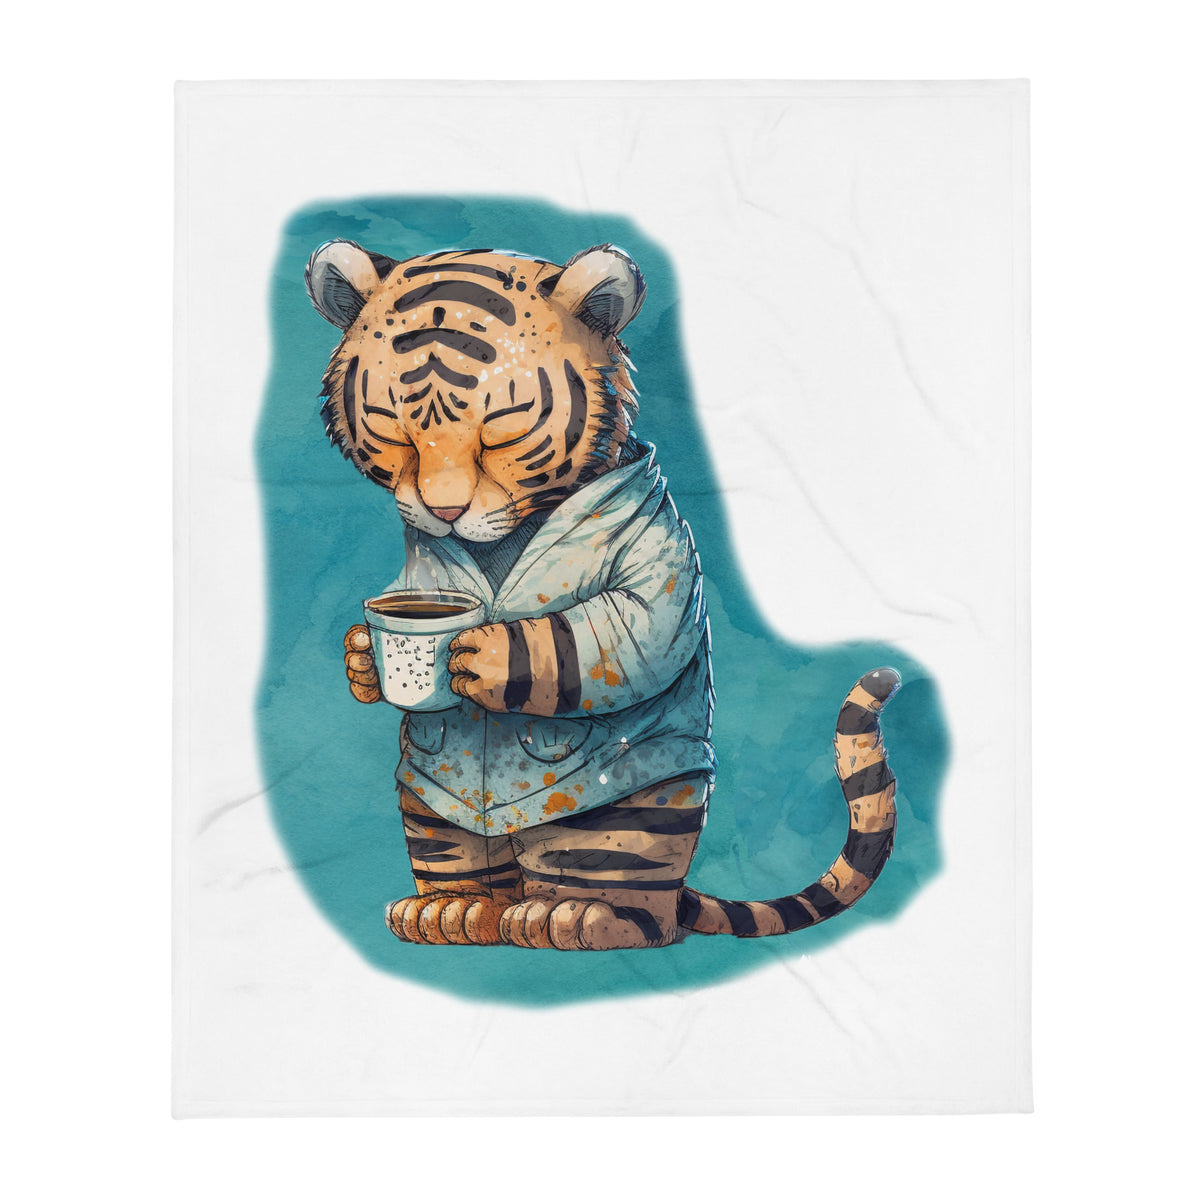 Sleepy Tiger 100% Polyester Soft Silk Touch Fabric Throw Blanket - Cozy, Durable and Adorable